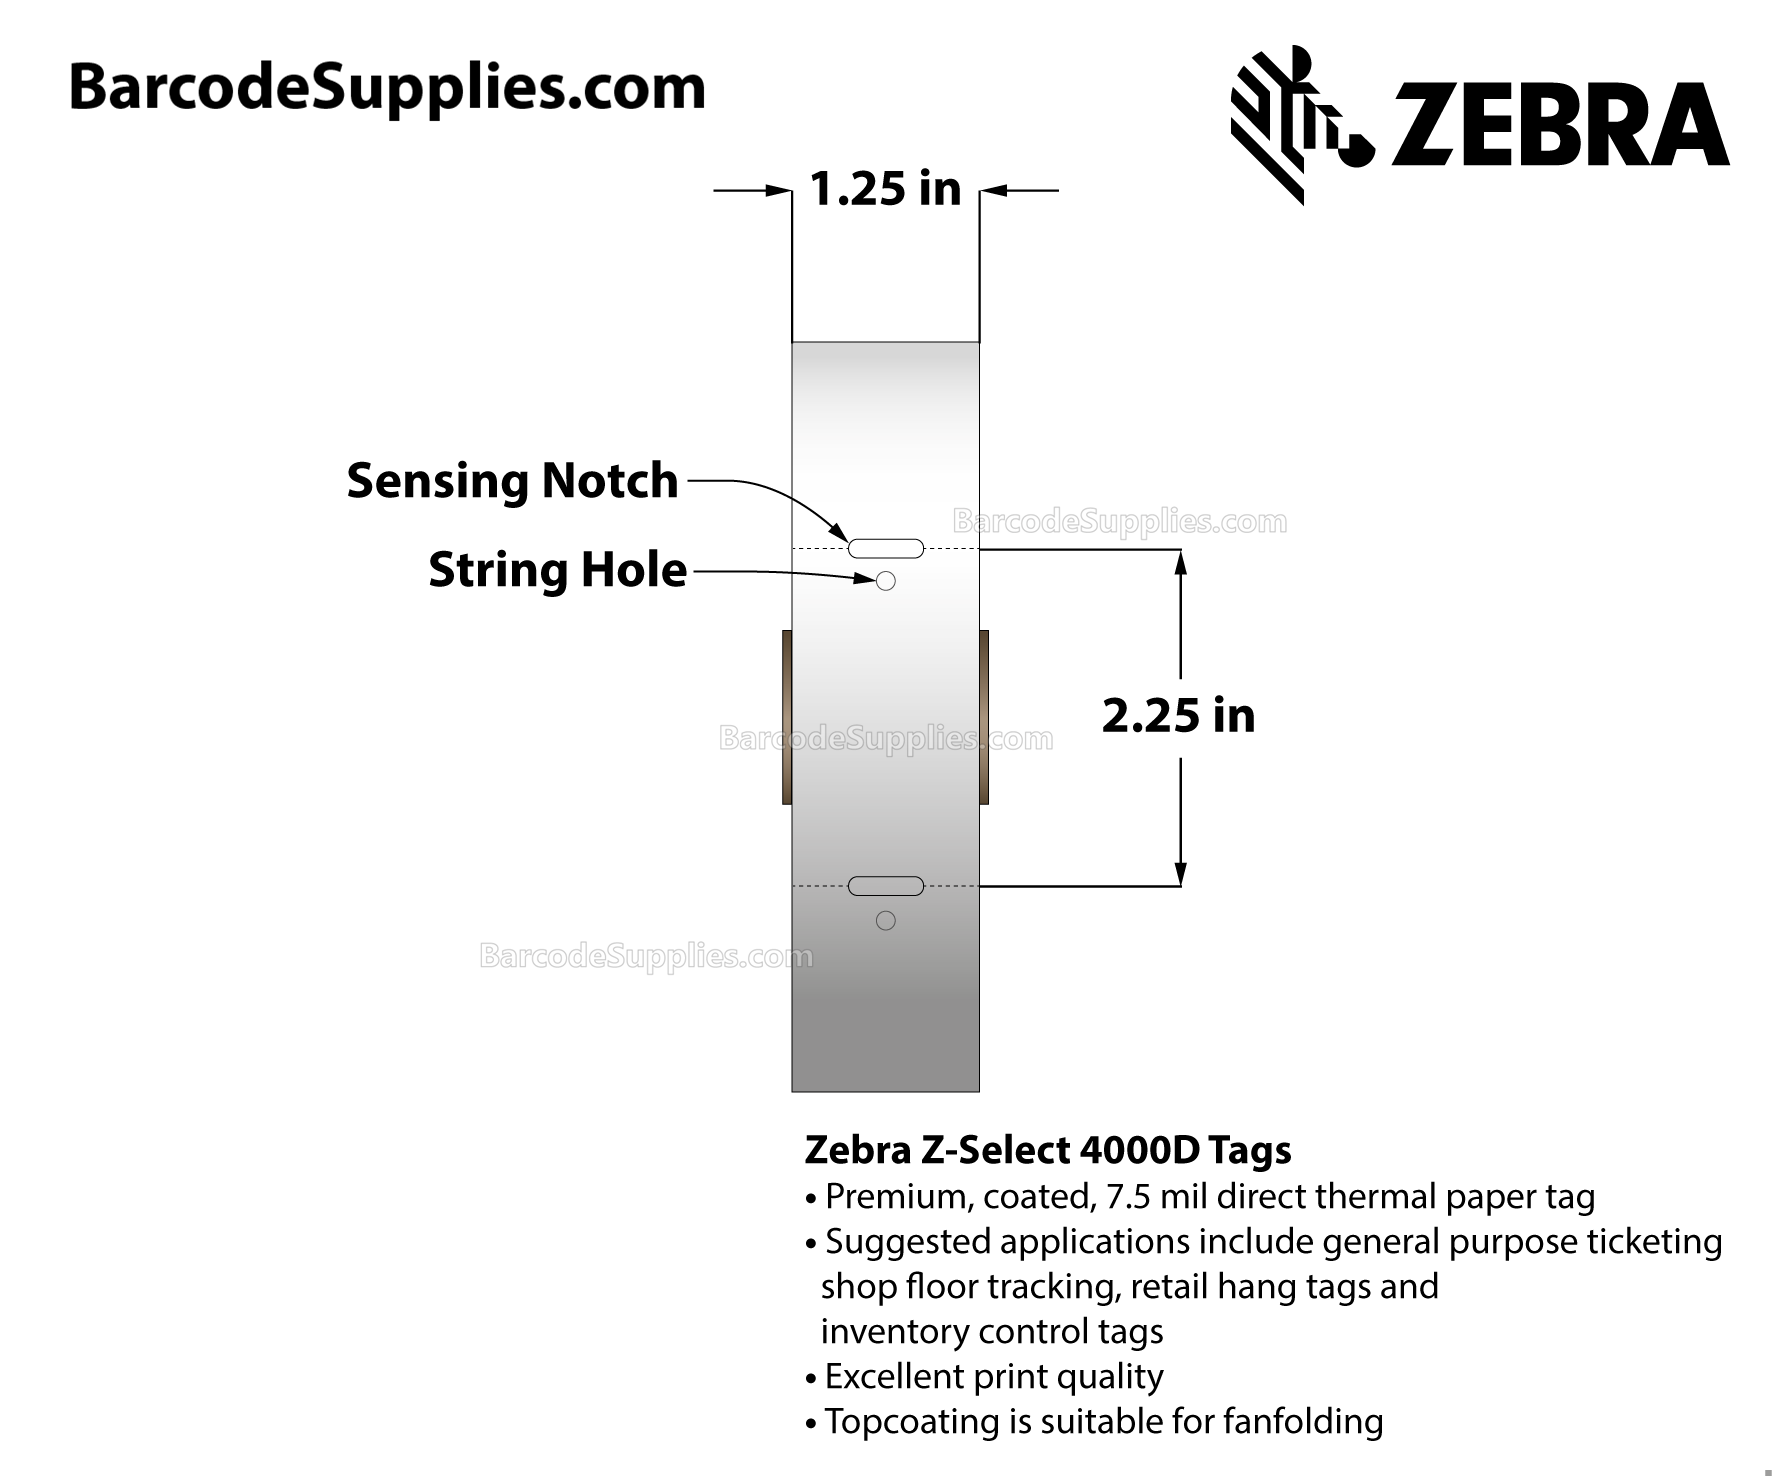 1.25 x 2.25 Direct Thermal White Z-Select 4000D 7 mil Tag Tags With No Adhesive - Contains sensing notch and stringhole - Perforated - 980 Tags Per Roll - Carton Of 6 Rolls - 5880 Tags Total - MPN: 10010053